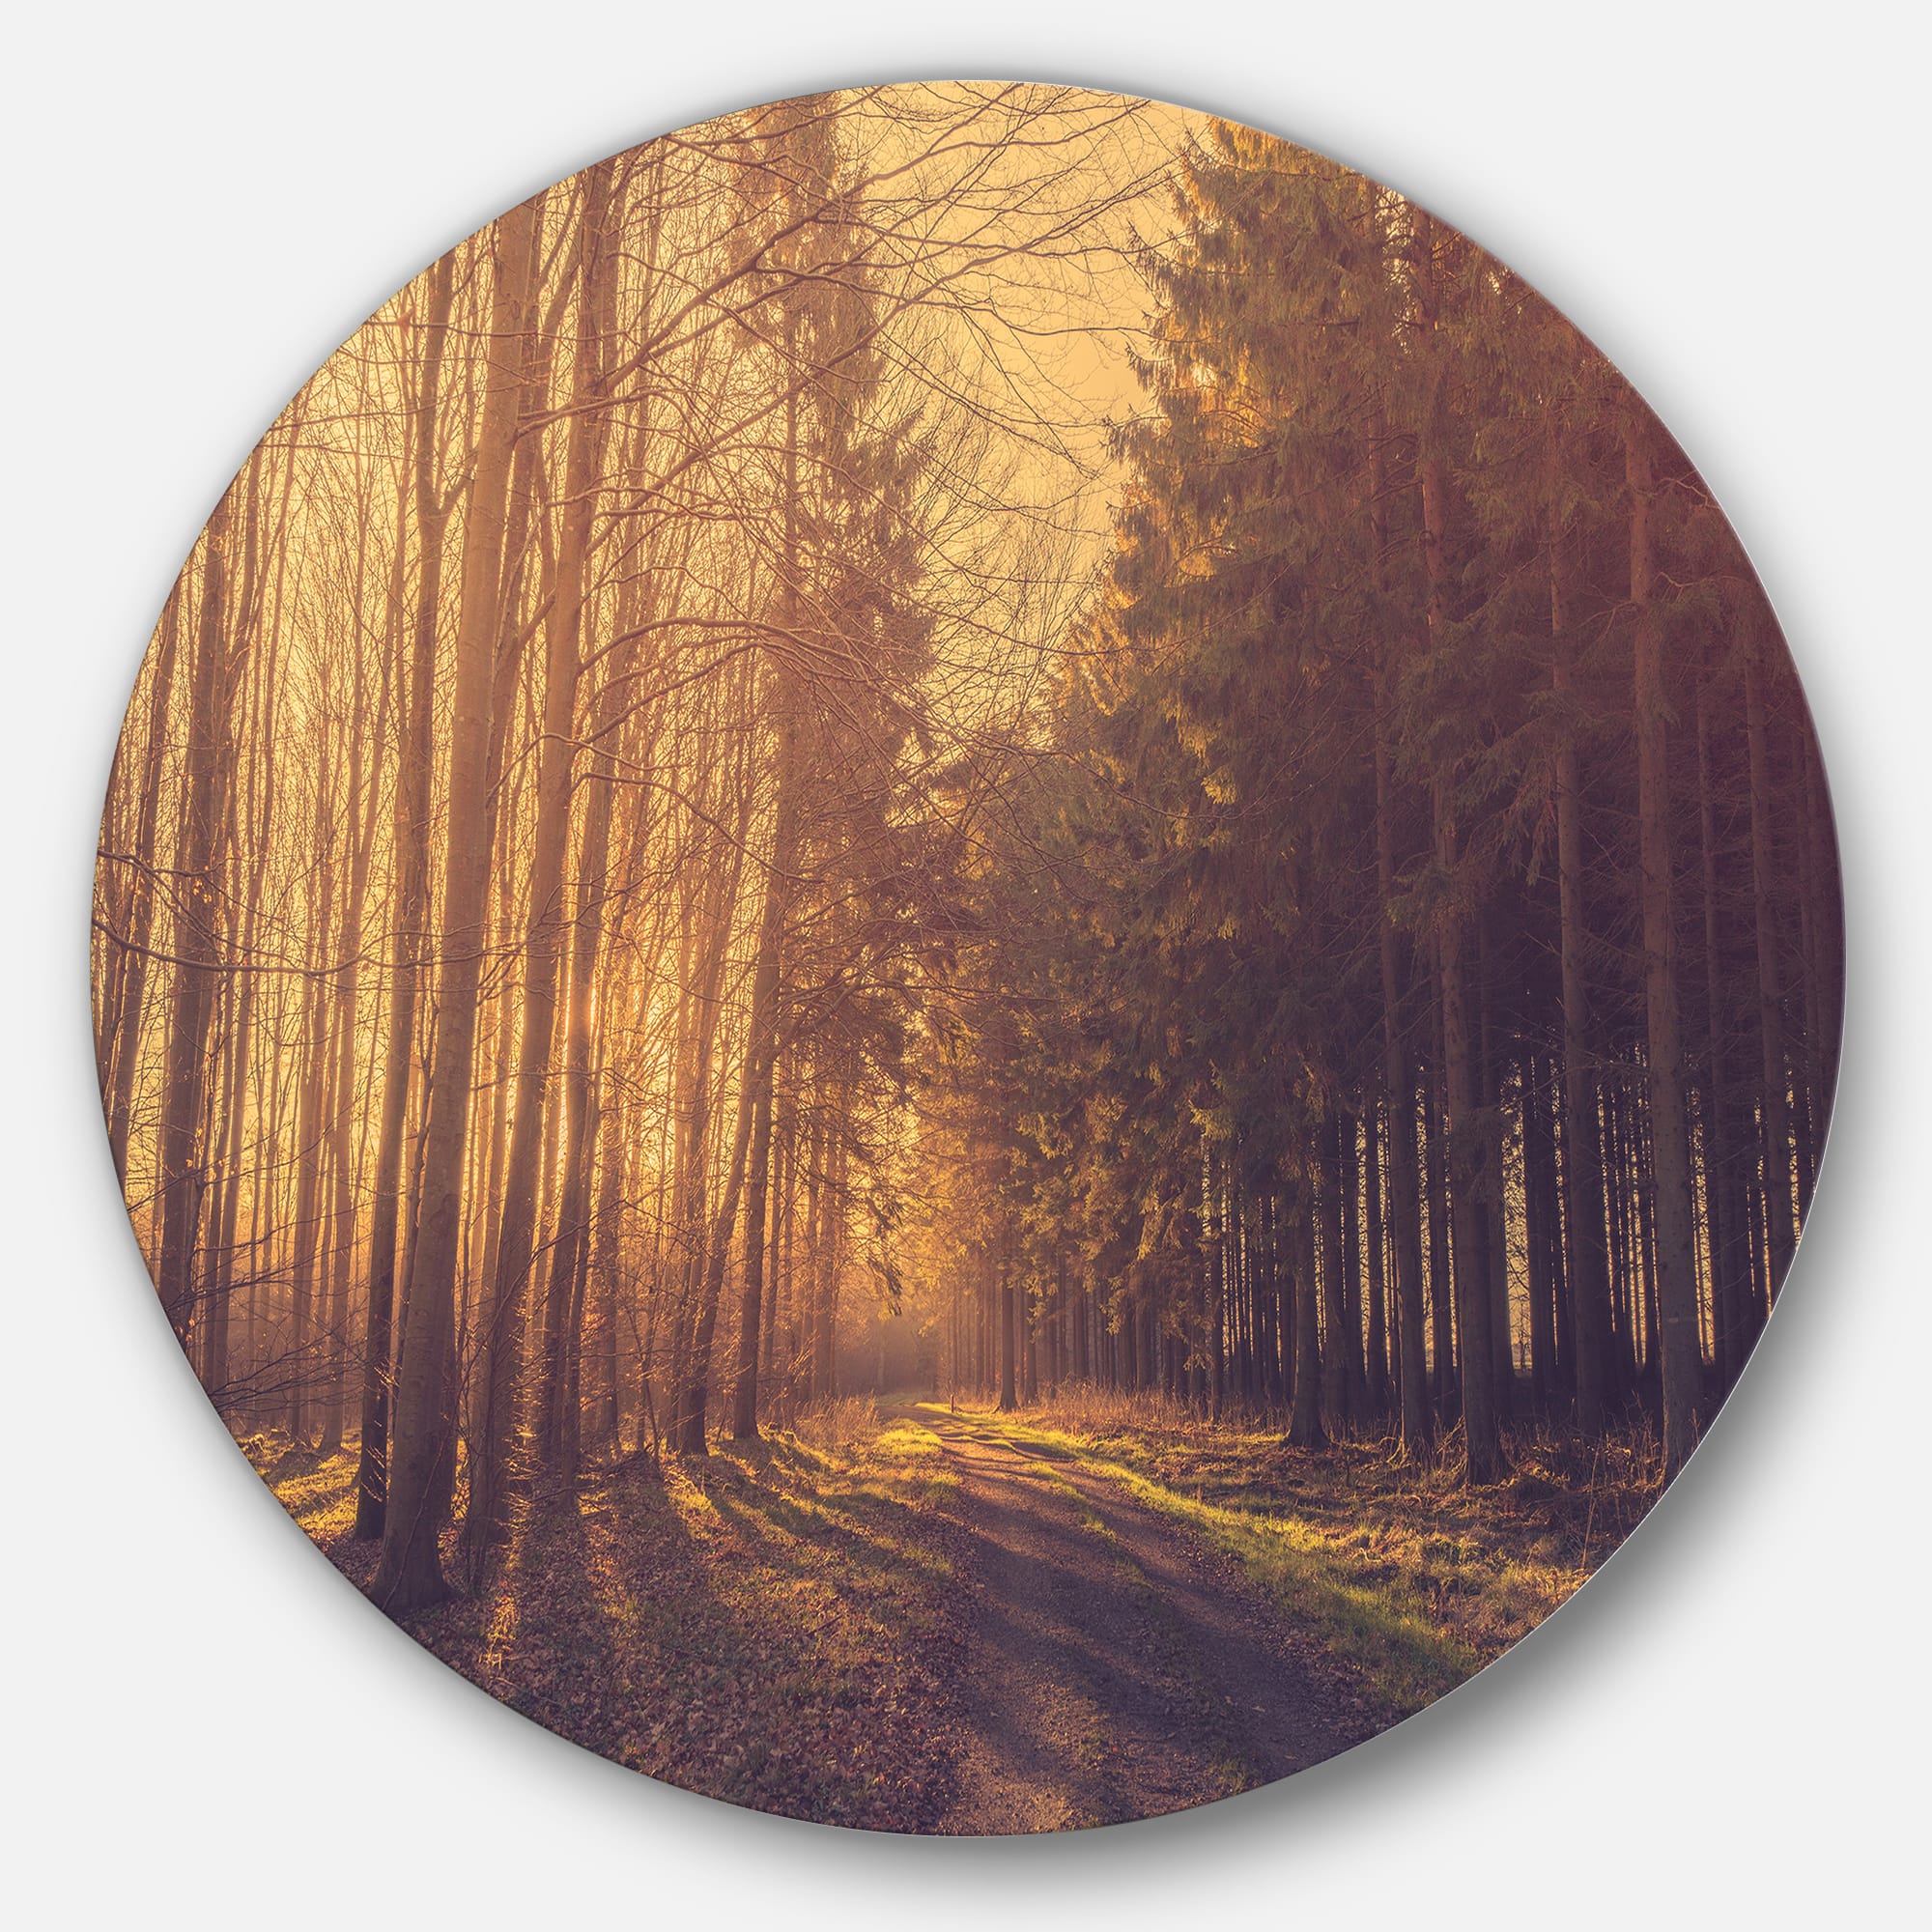 Designart - Pine Tree Forest by Road&#x27; Landscape Photo Circle Metal Wall Art